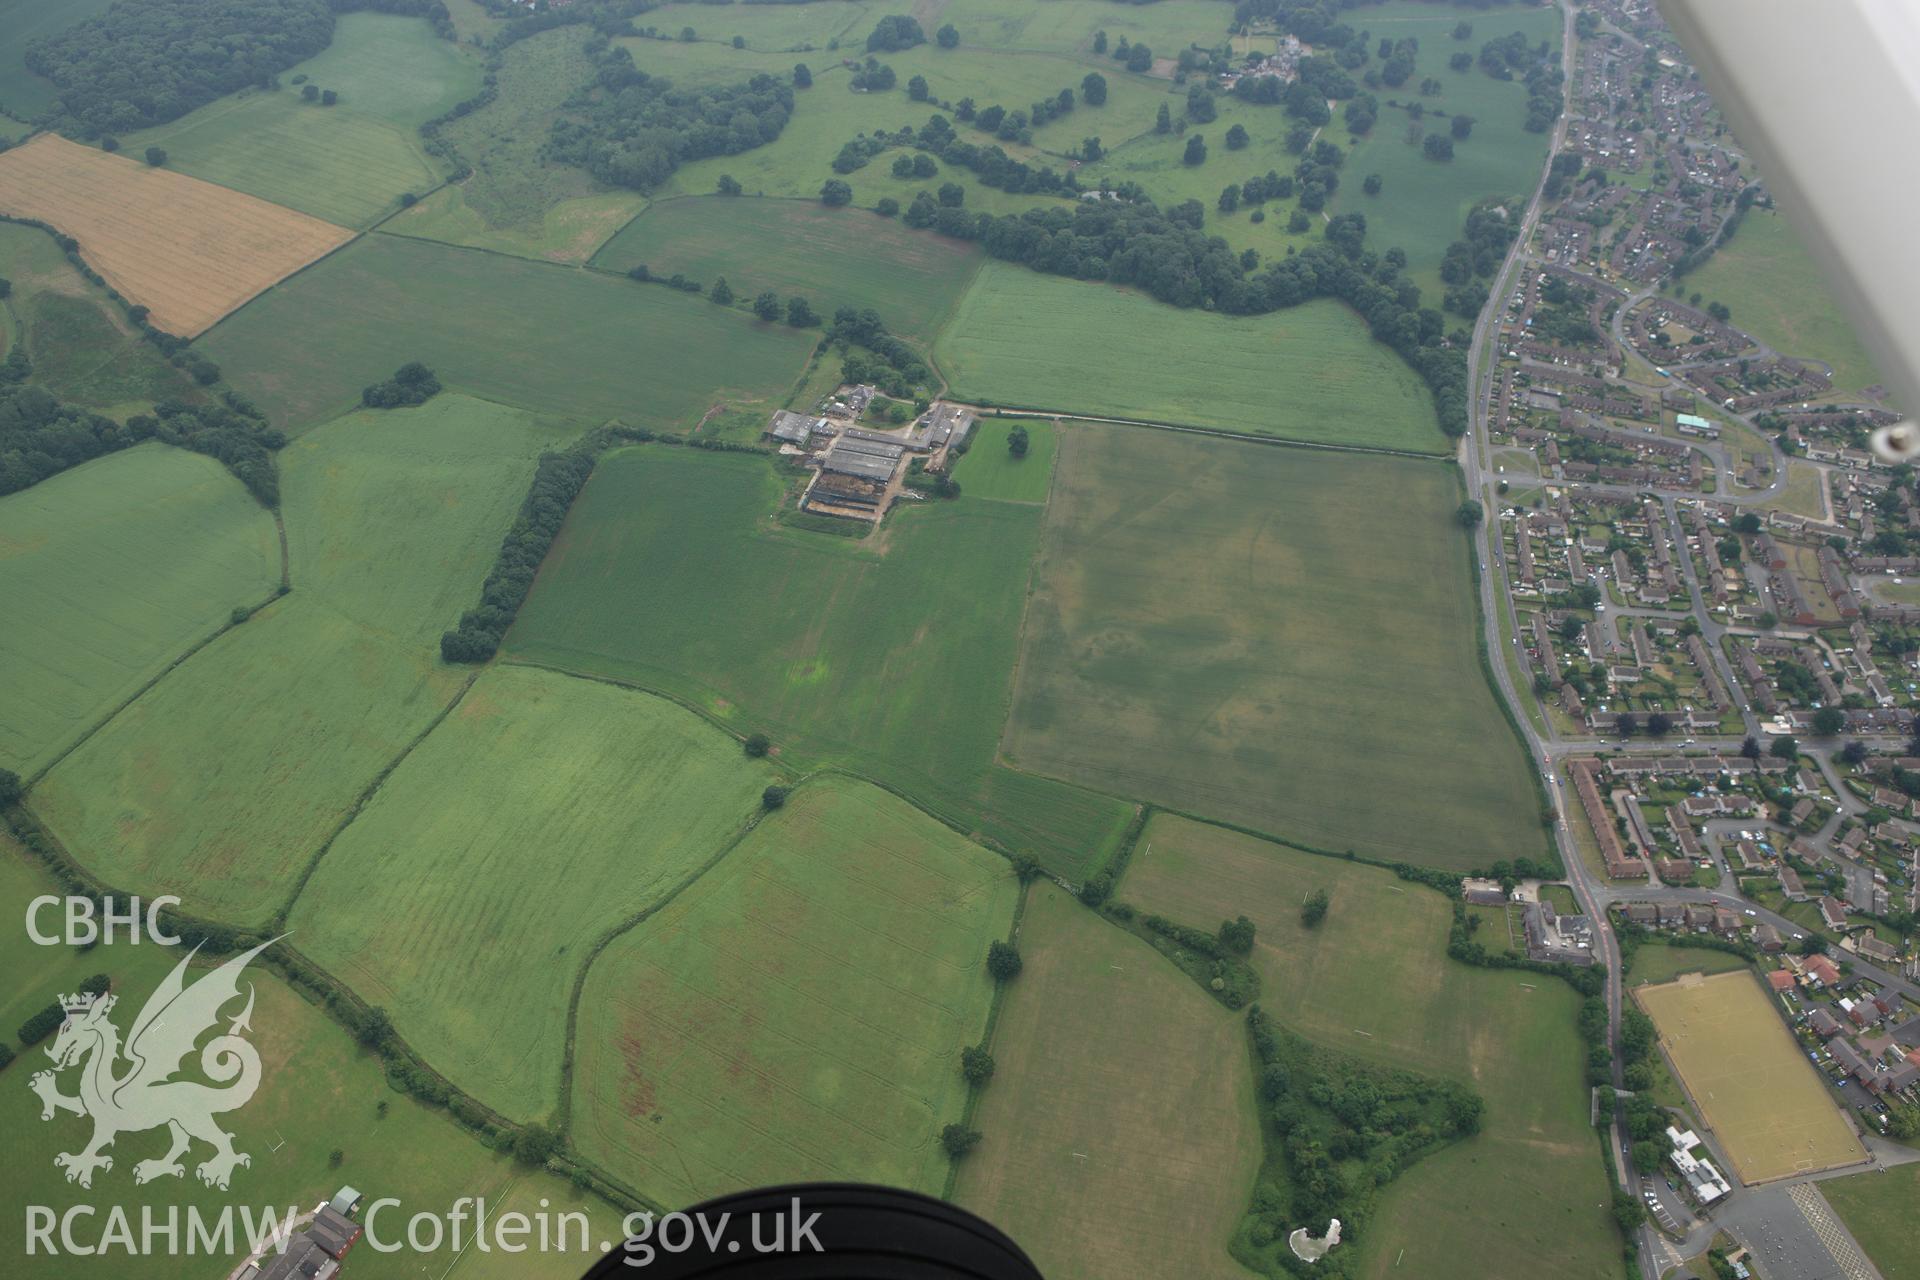 RCAHMW colour oblique aerial photograph of cropmarks northwest of Llwyn Knottia. Taken on 29 June 2009 by Toby Driver